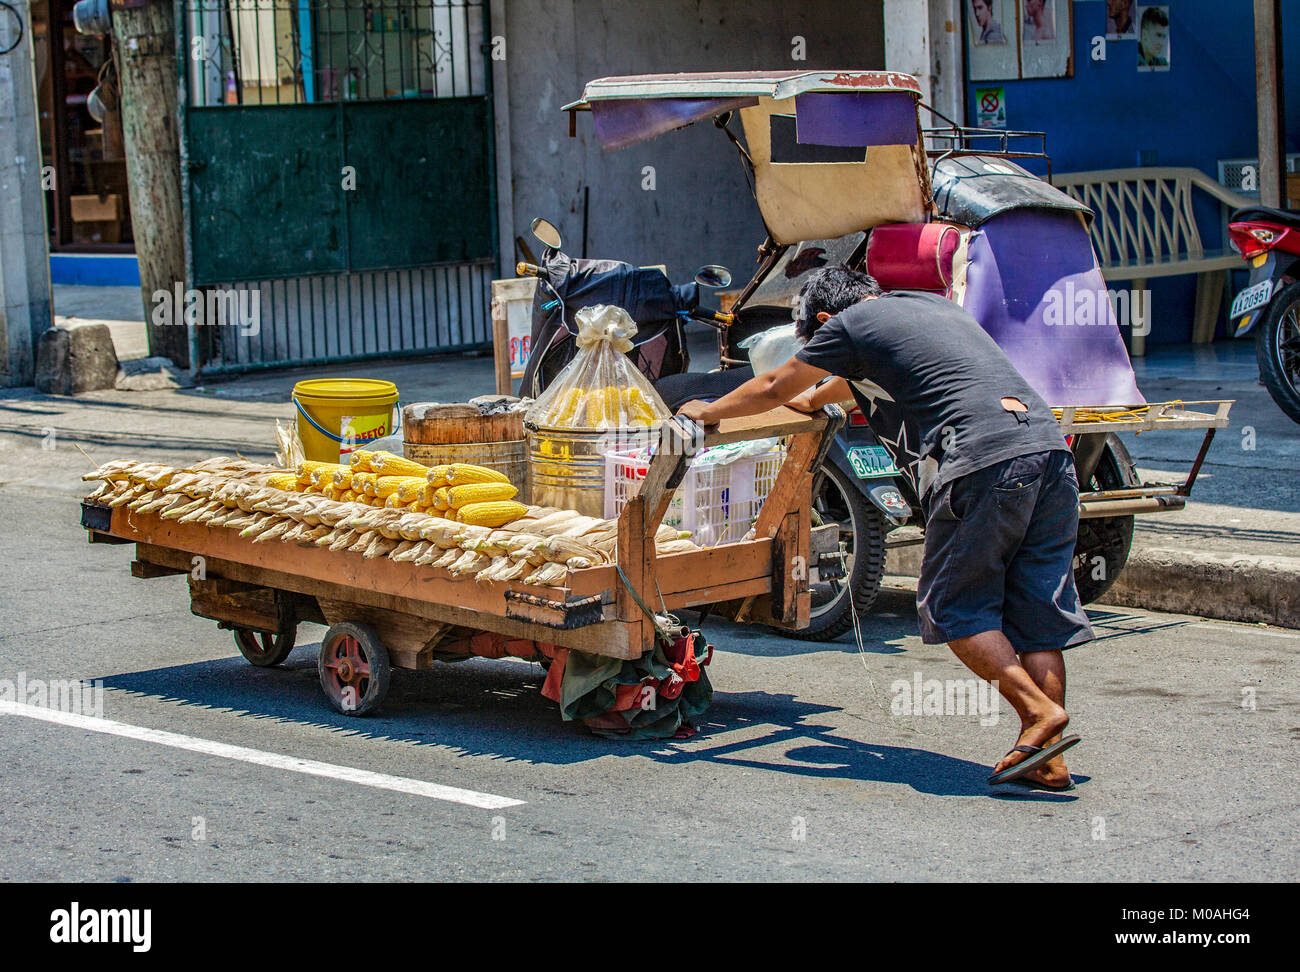 A Filipino street food vendor works hard pushing his heavy food cart full of corn up a road in Agoo, Luzon Island, Philippines. Stock Photo